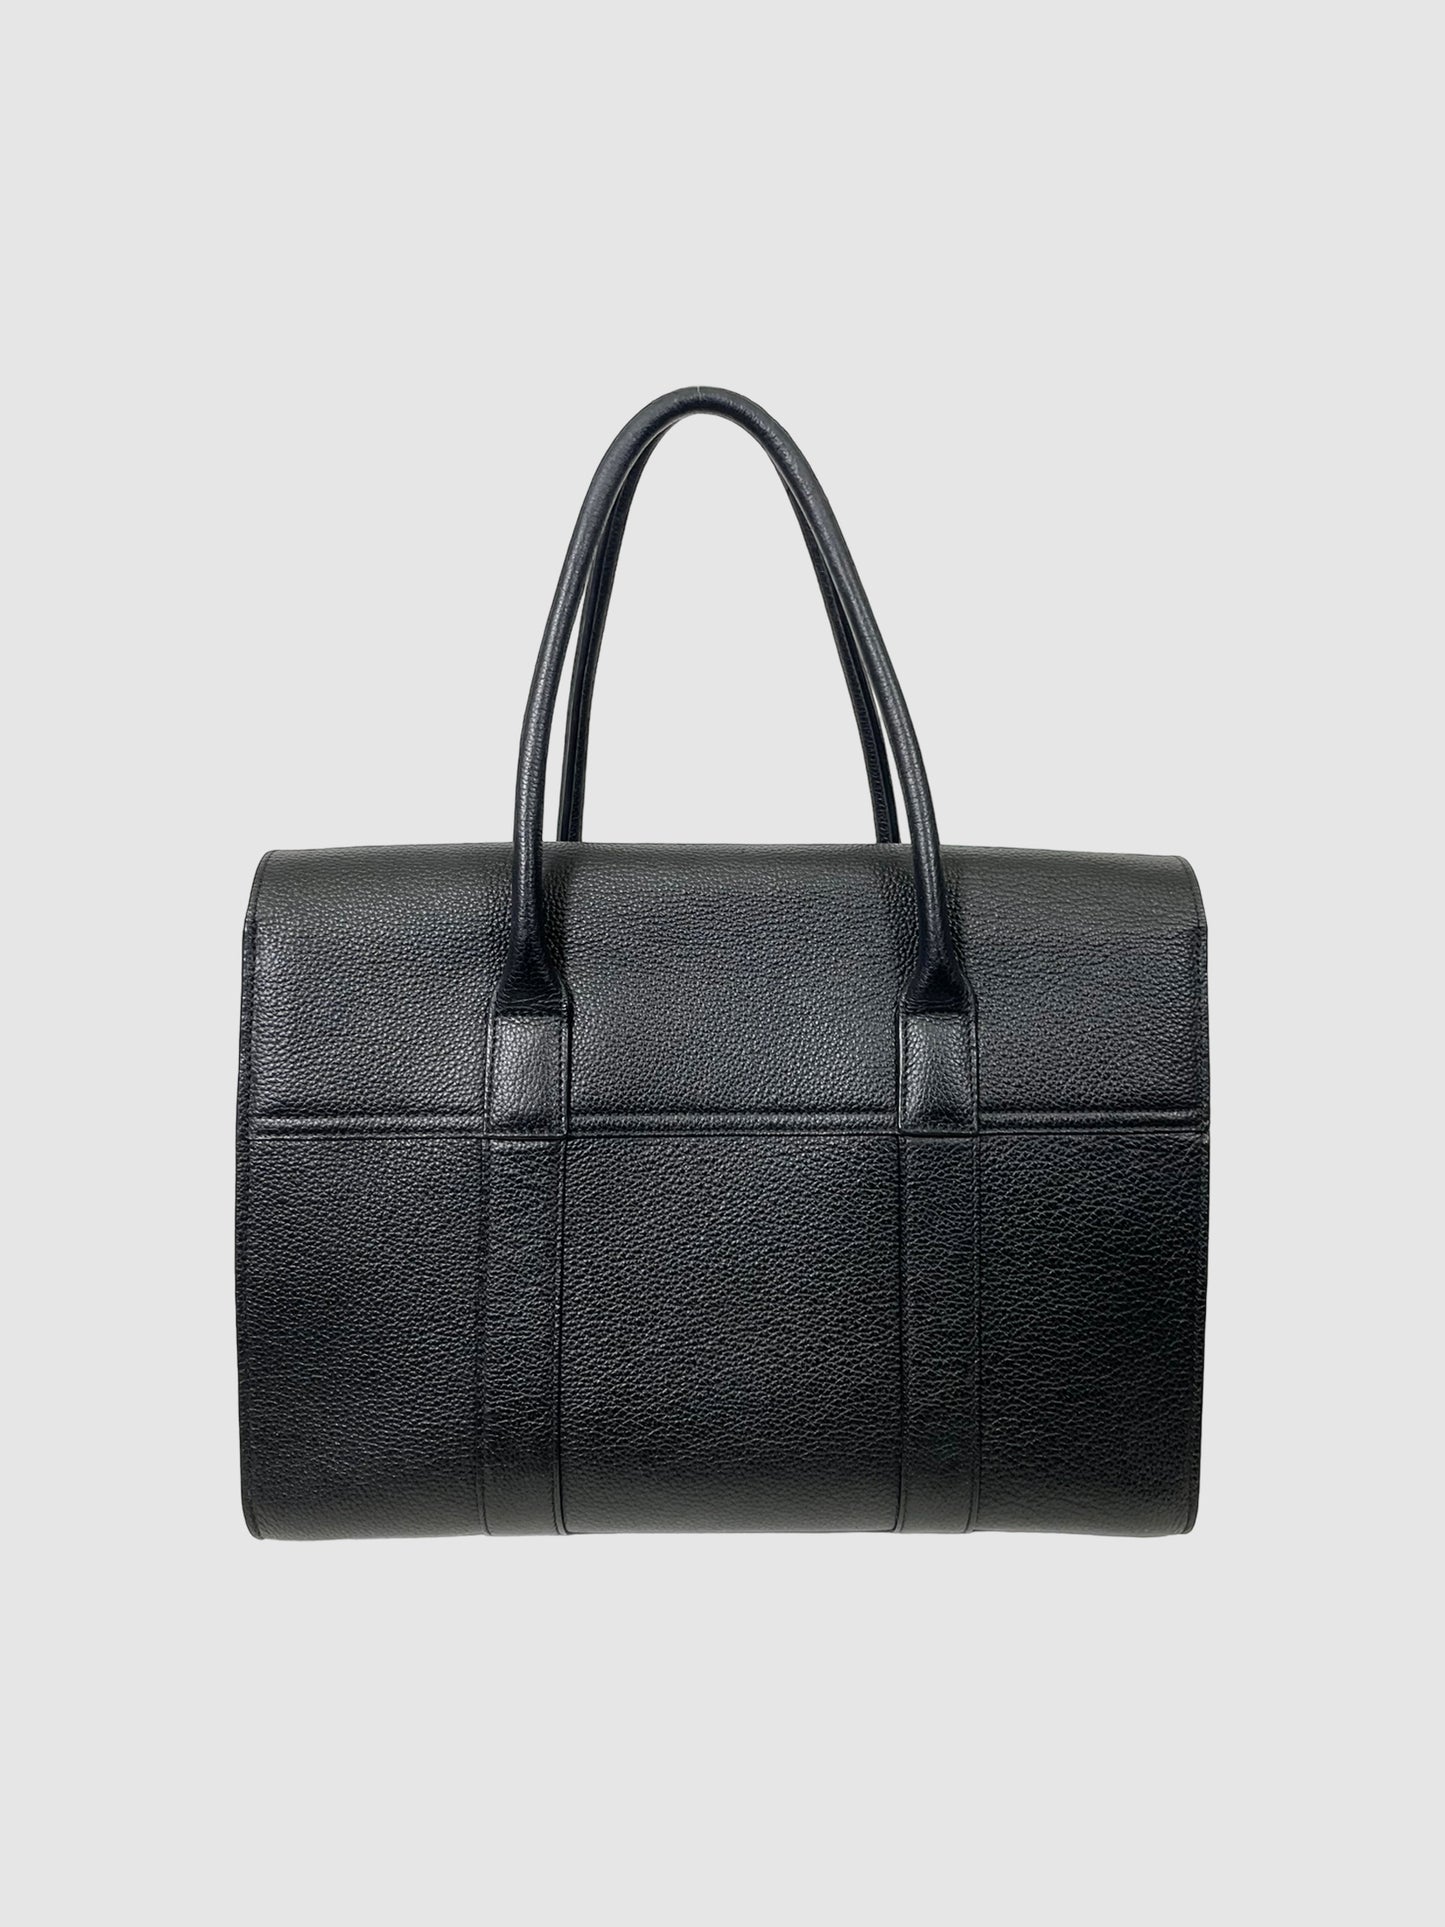 Mulberry Leather Handle Bag